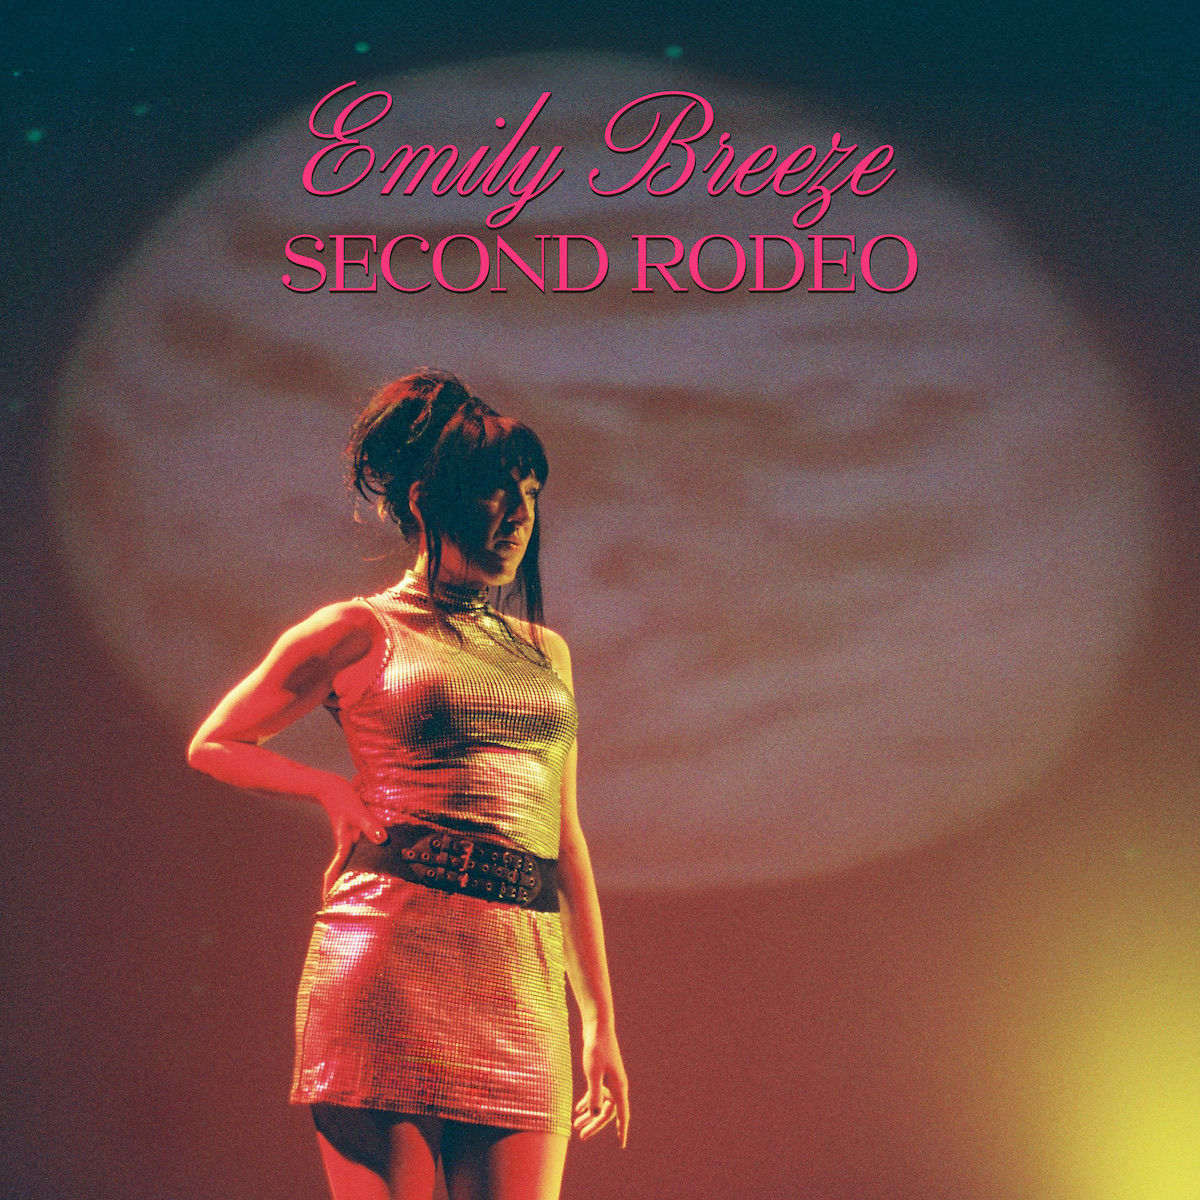 EP REVIEW: Second Rodeo by Emily Breeze